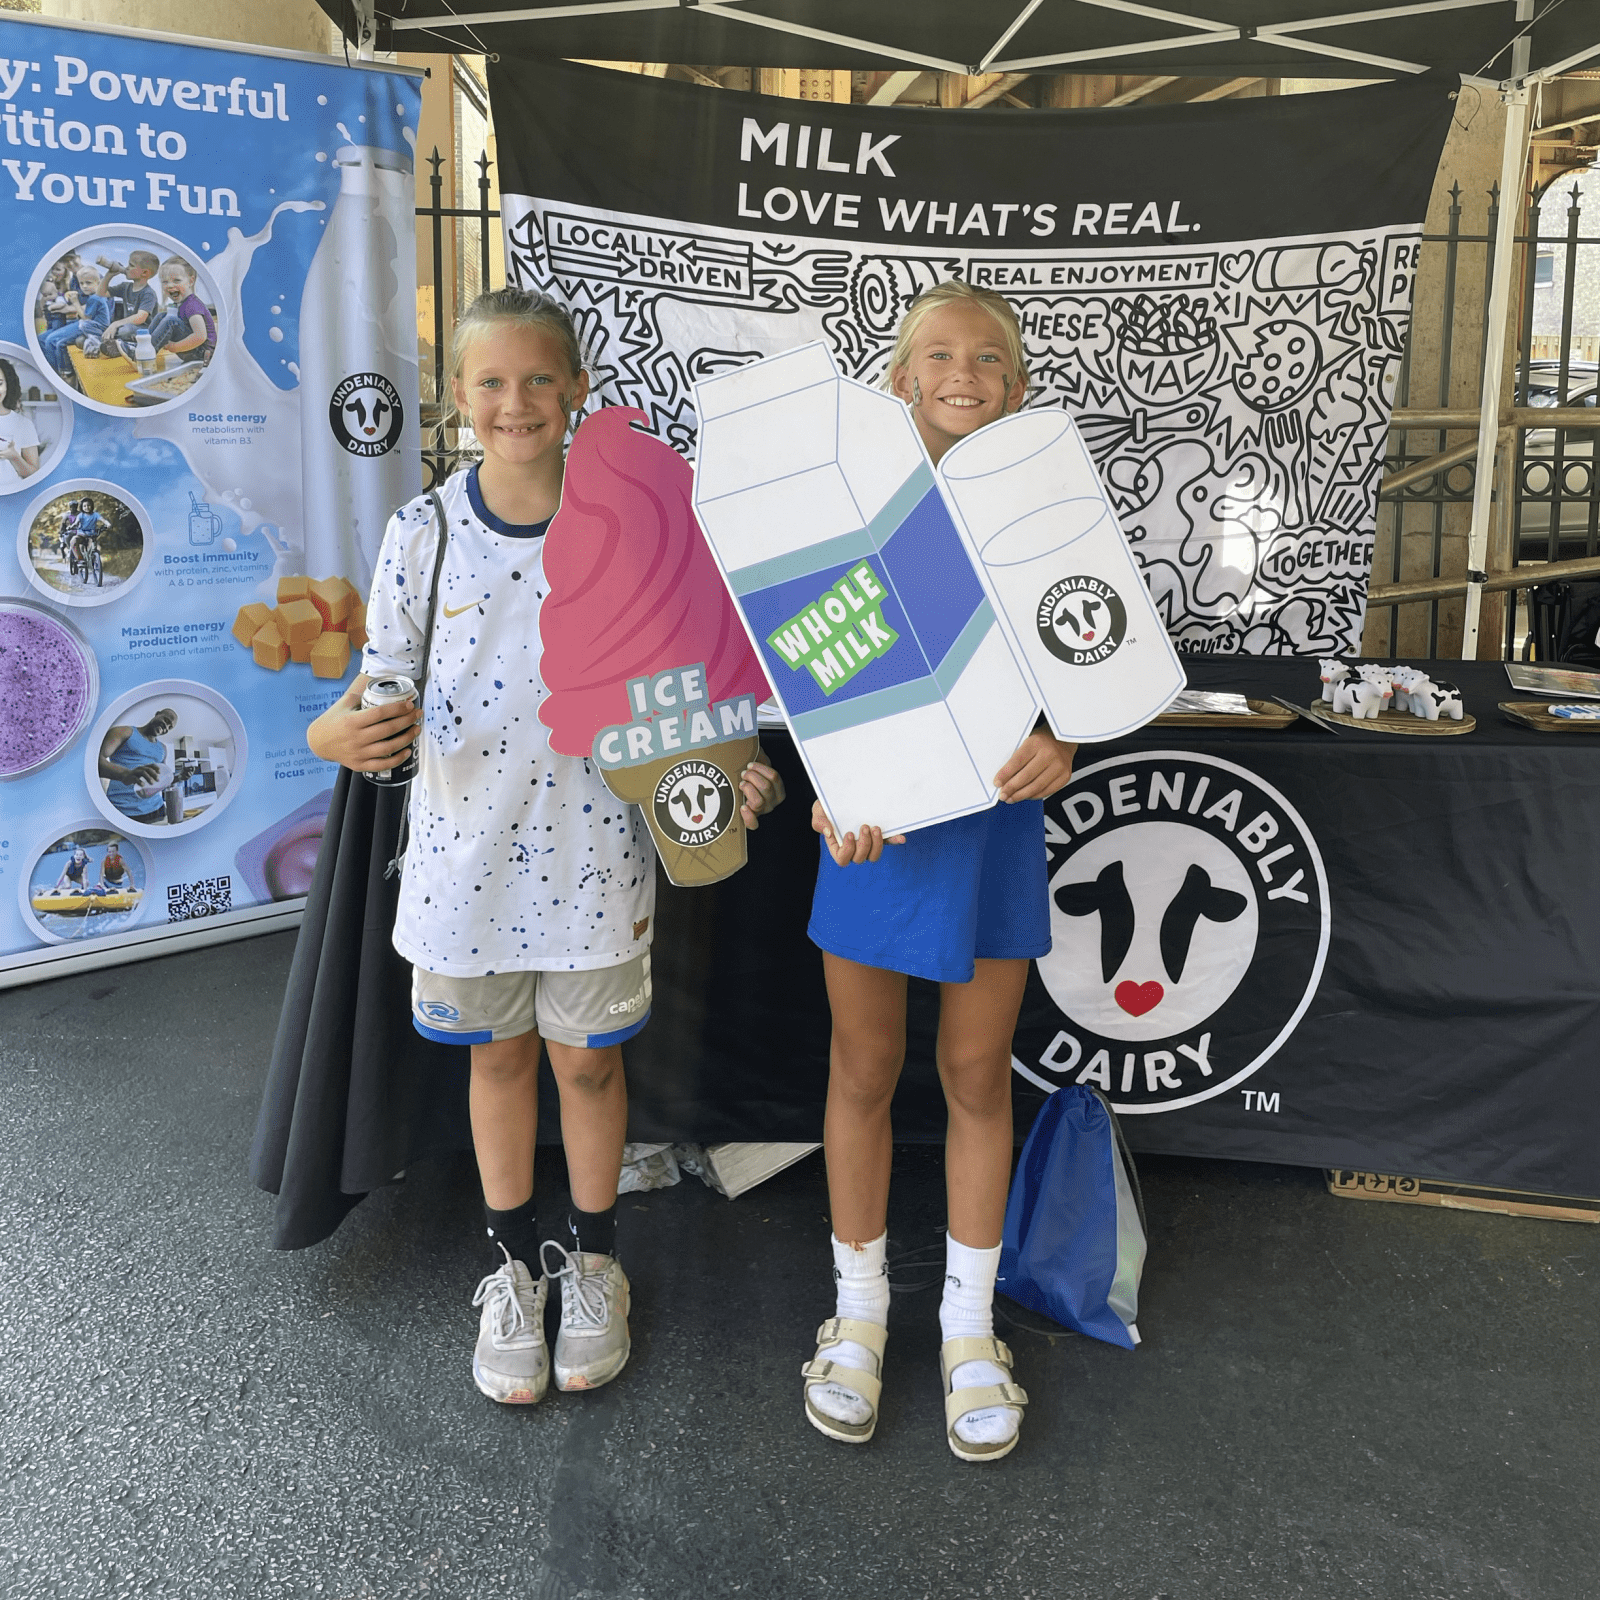 Two children holding milk related props for photo